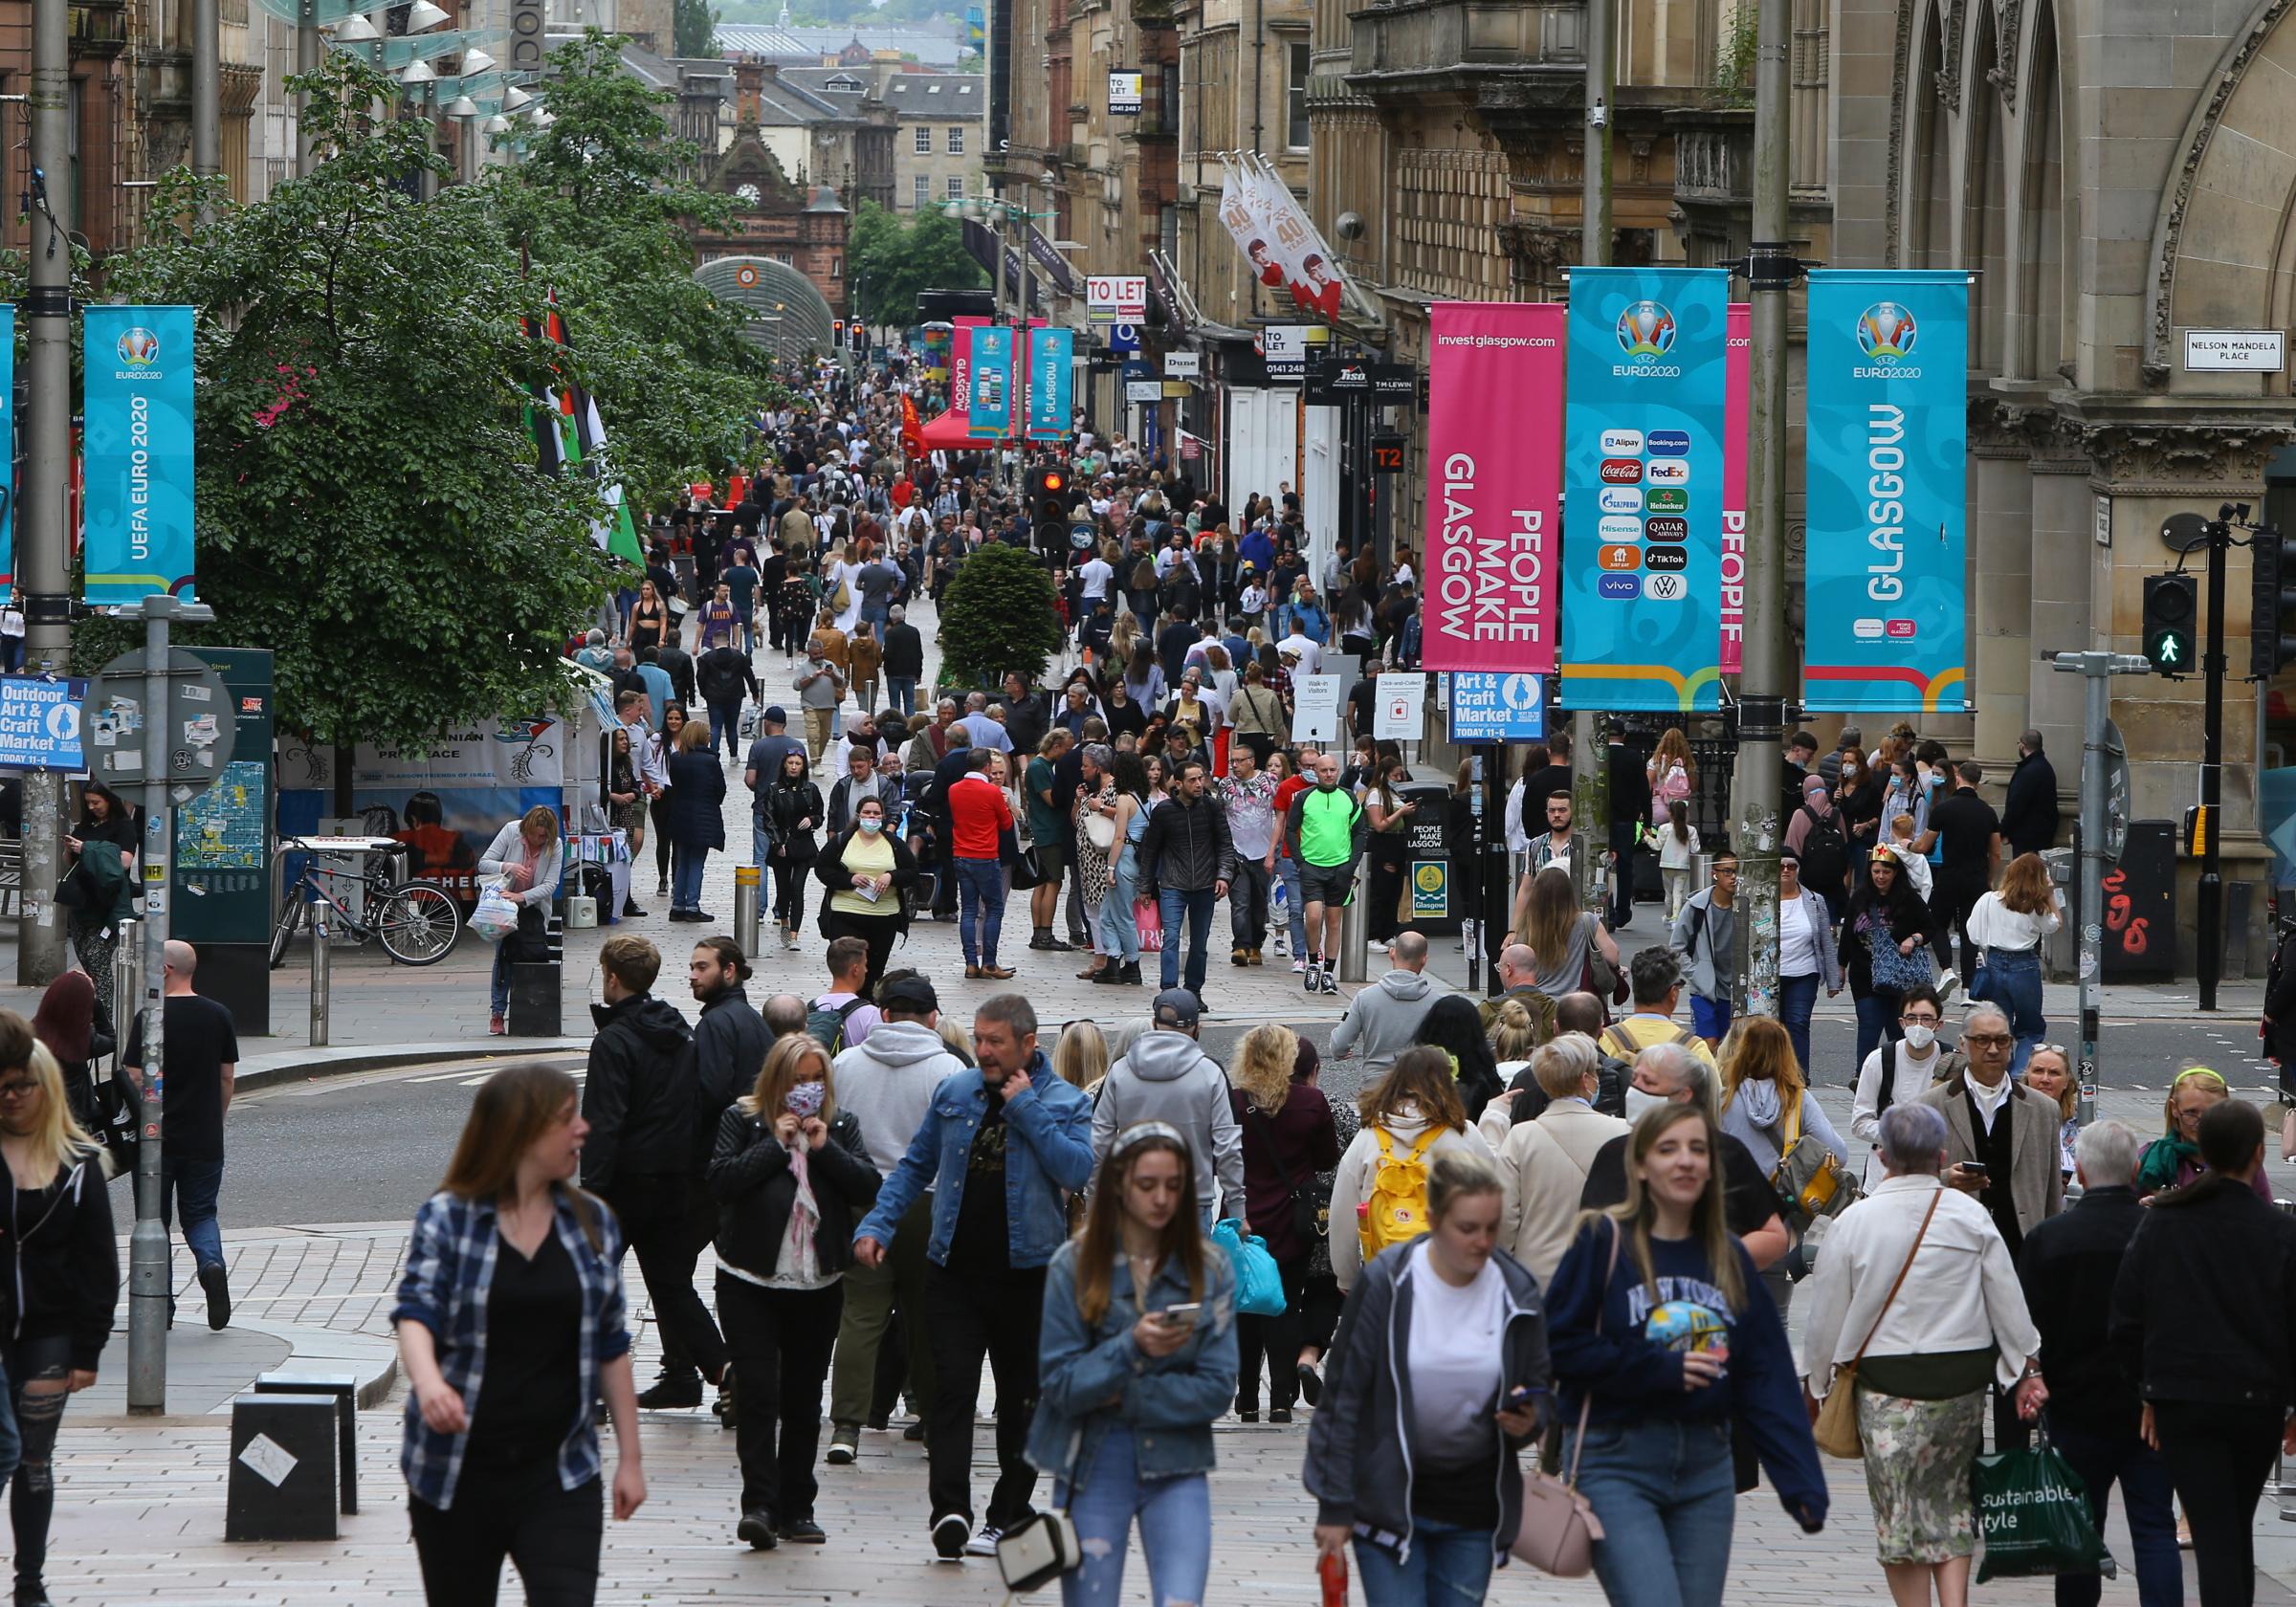 Glasgow is on the verge of a fourth era, says its City Urbanist